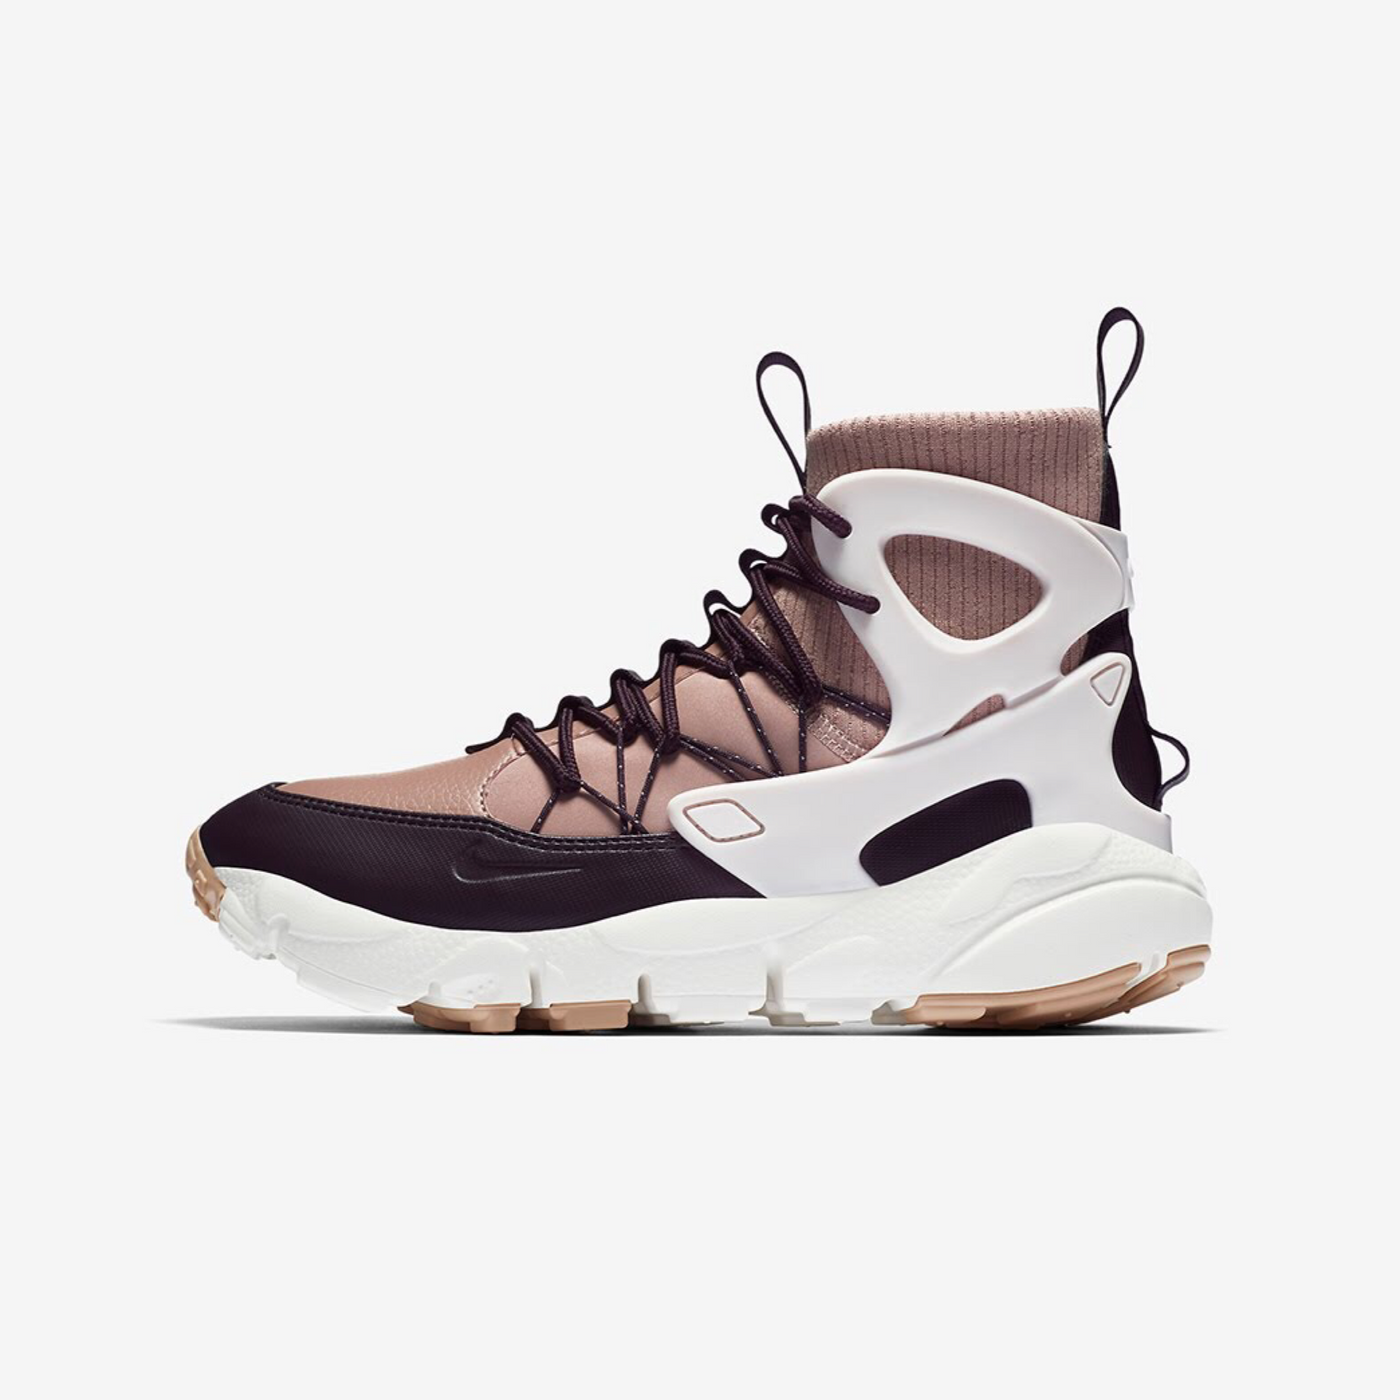 AA0519-600 Nike WMNS Air Footscape Mid Utility  Nike Air Footscape NM